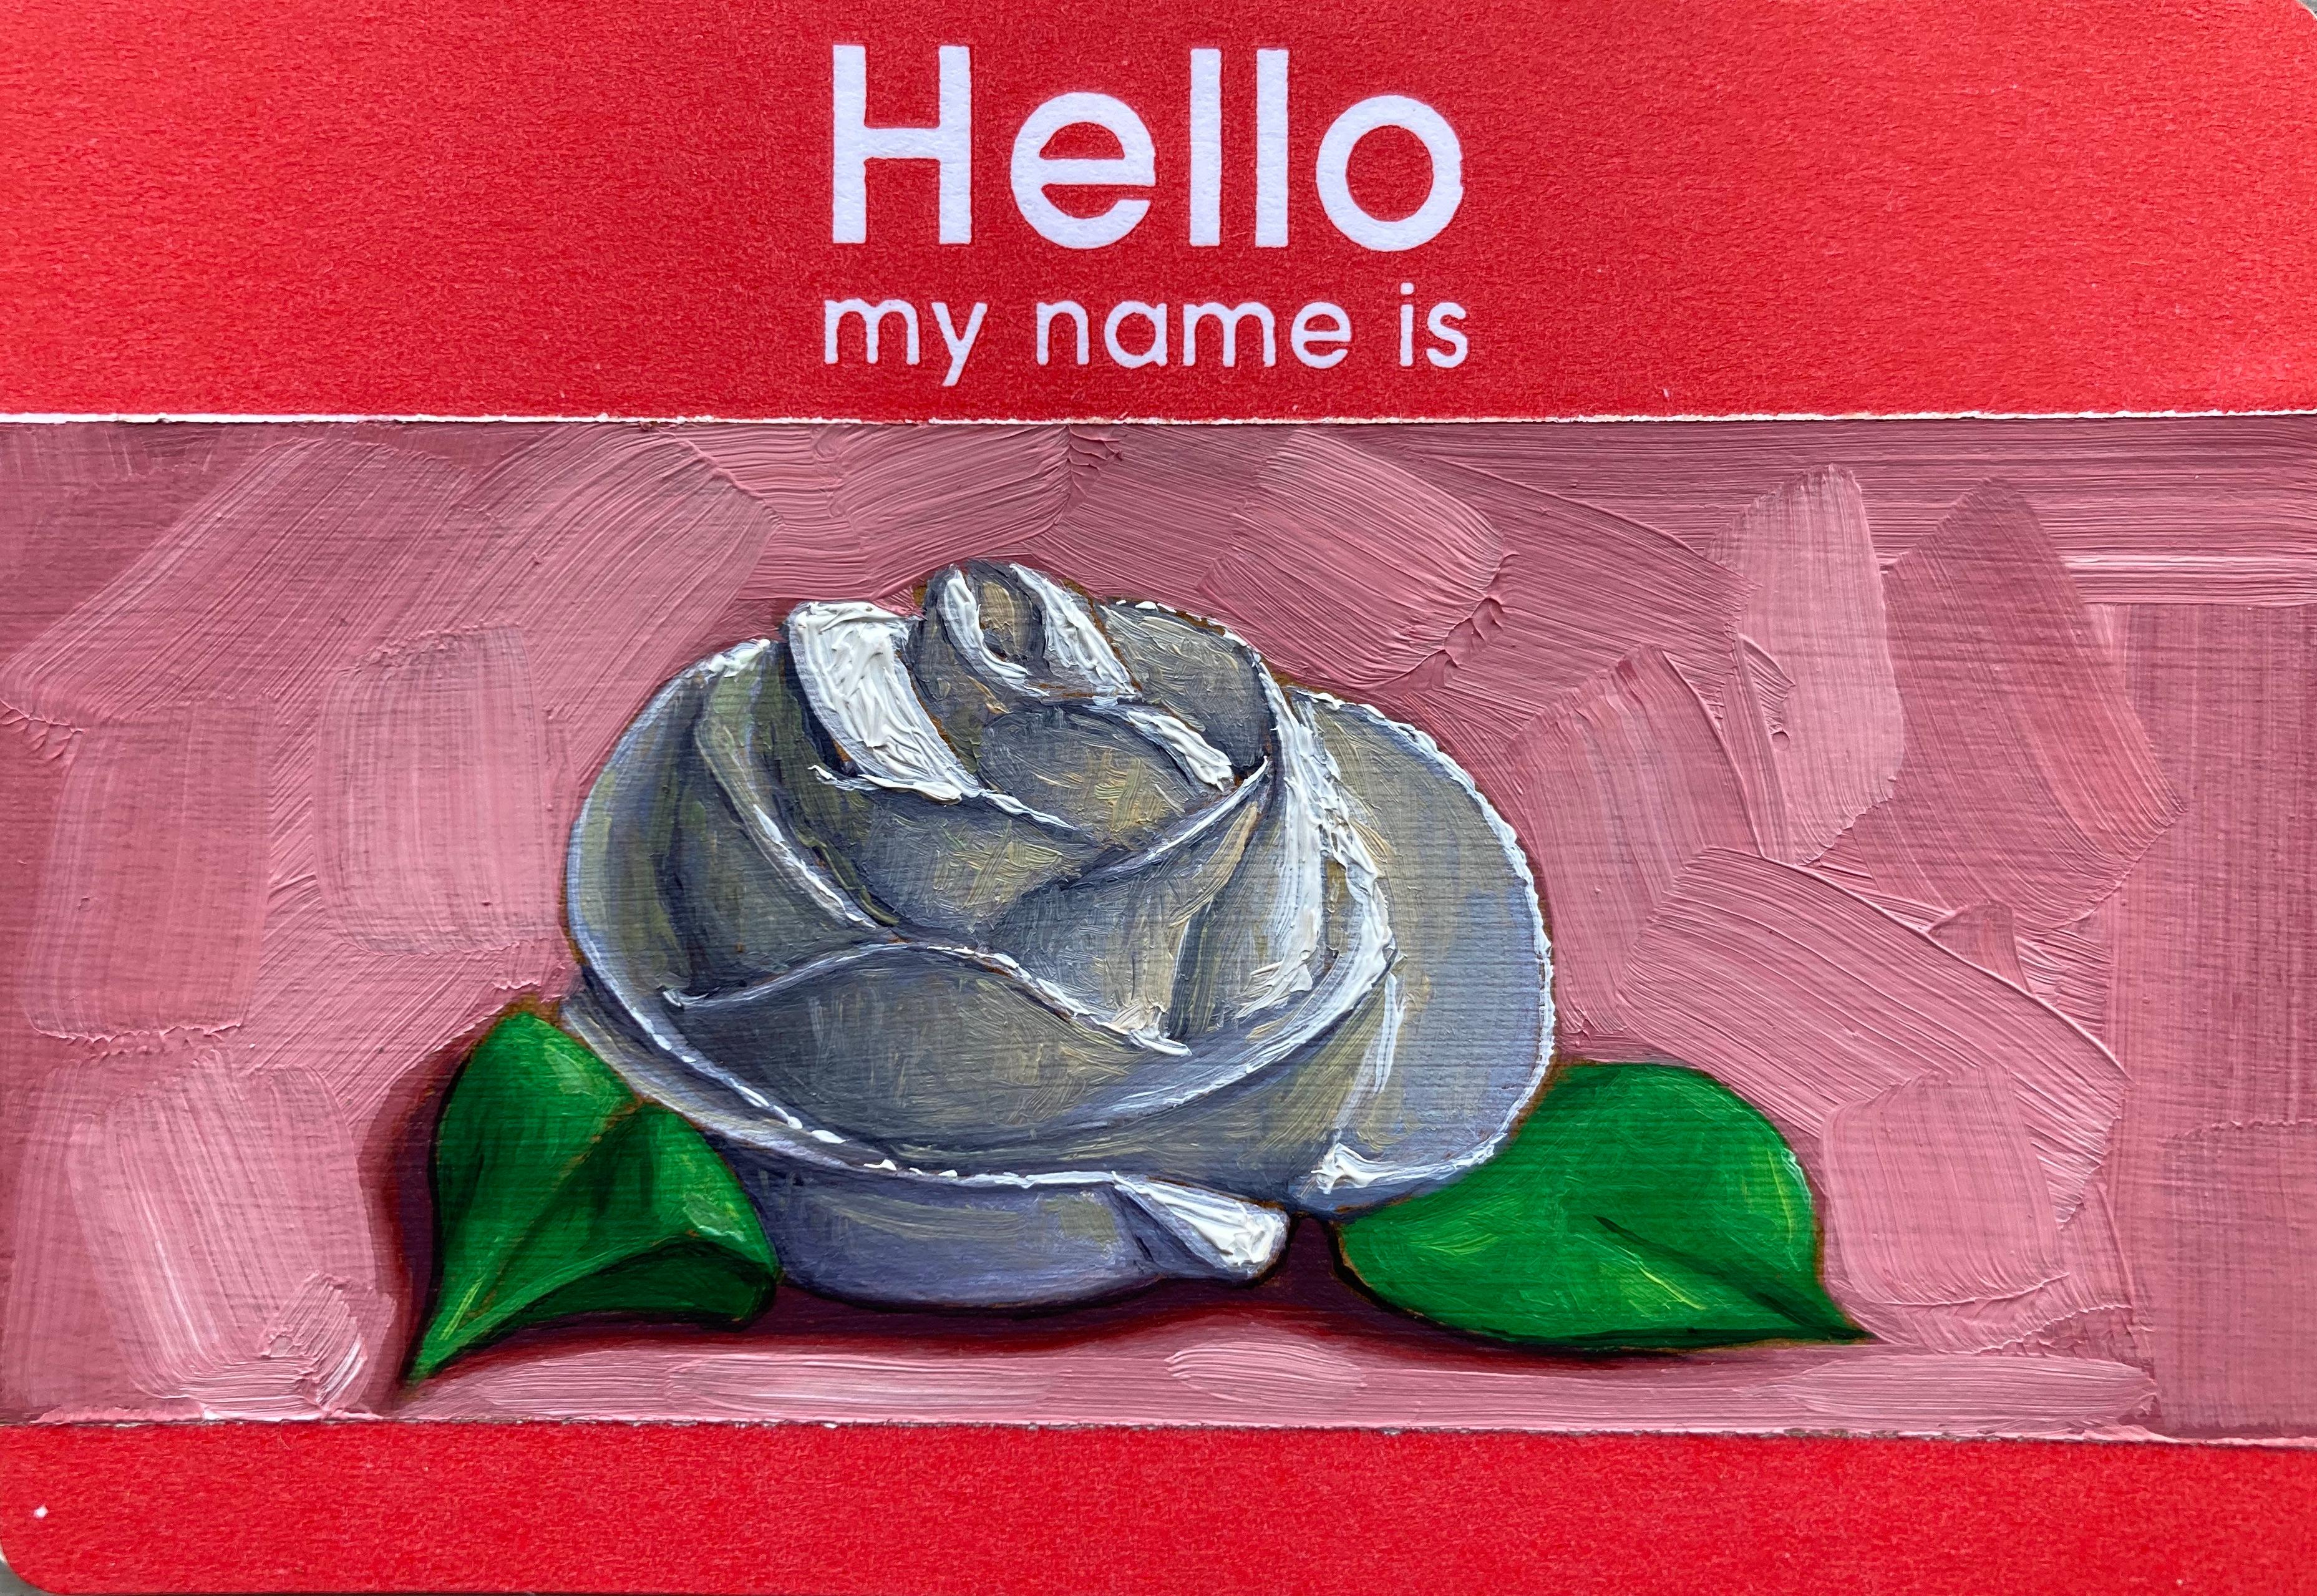 Hello, My Name Is: Rose - miniature pictograph painting on paper